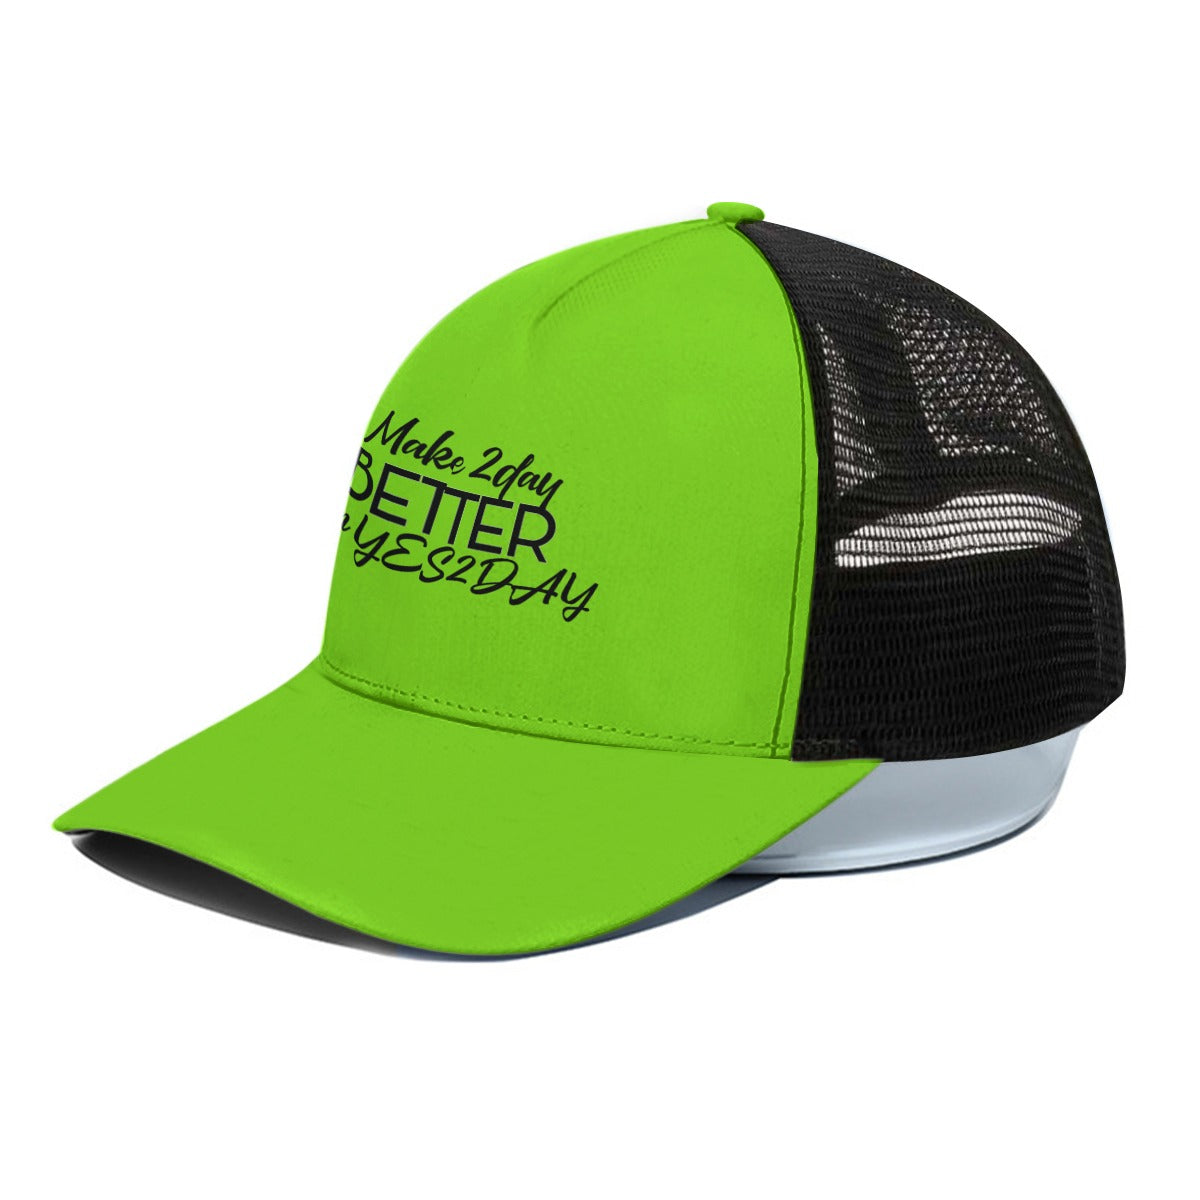 Make 2Day Better Then YES2DAY Lime Green/Black Half-mesh